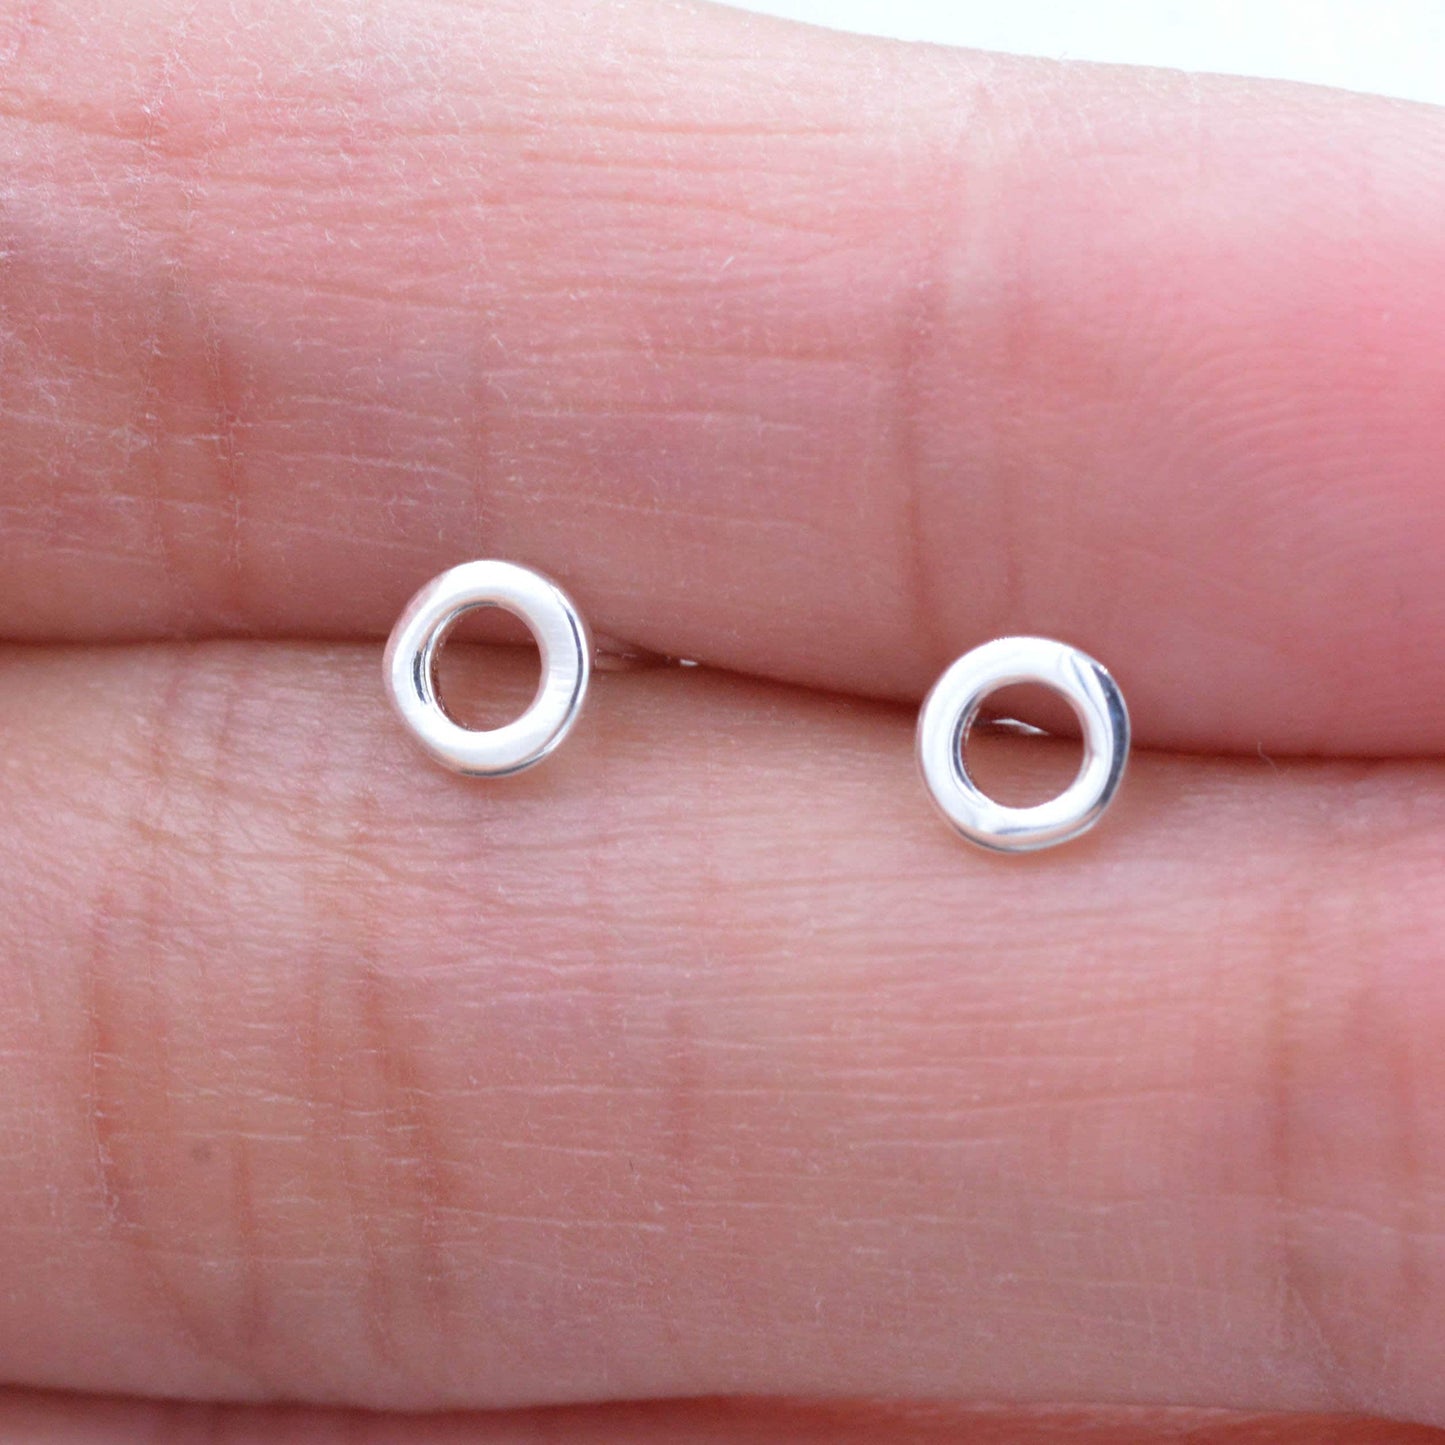 Small Pair of Sterling Silver Tiny Little Open Circle Dot Minimalist Geometric Stud Earrings, Dainty and Delicate Design